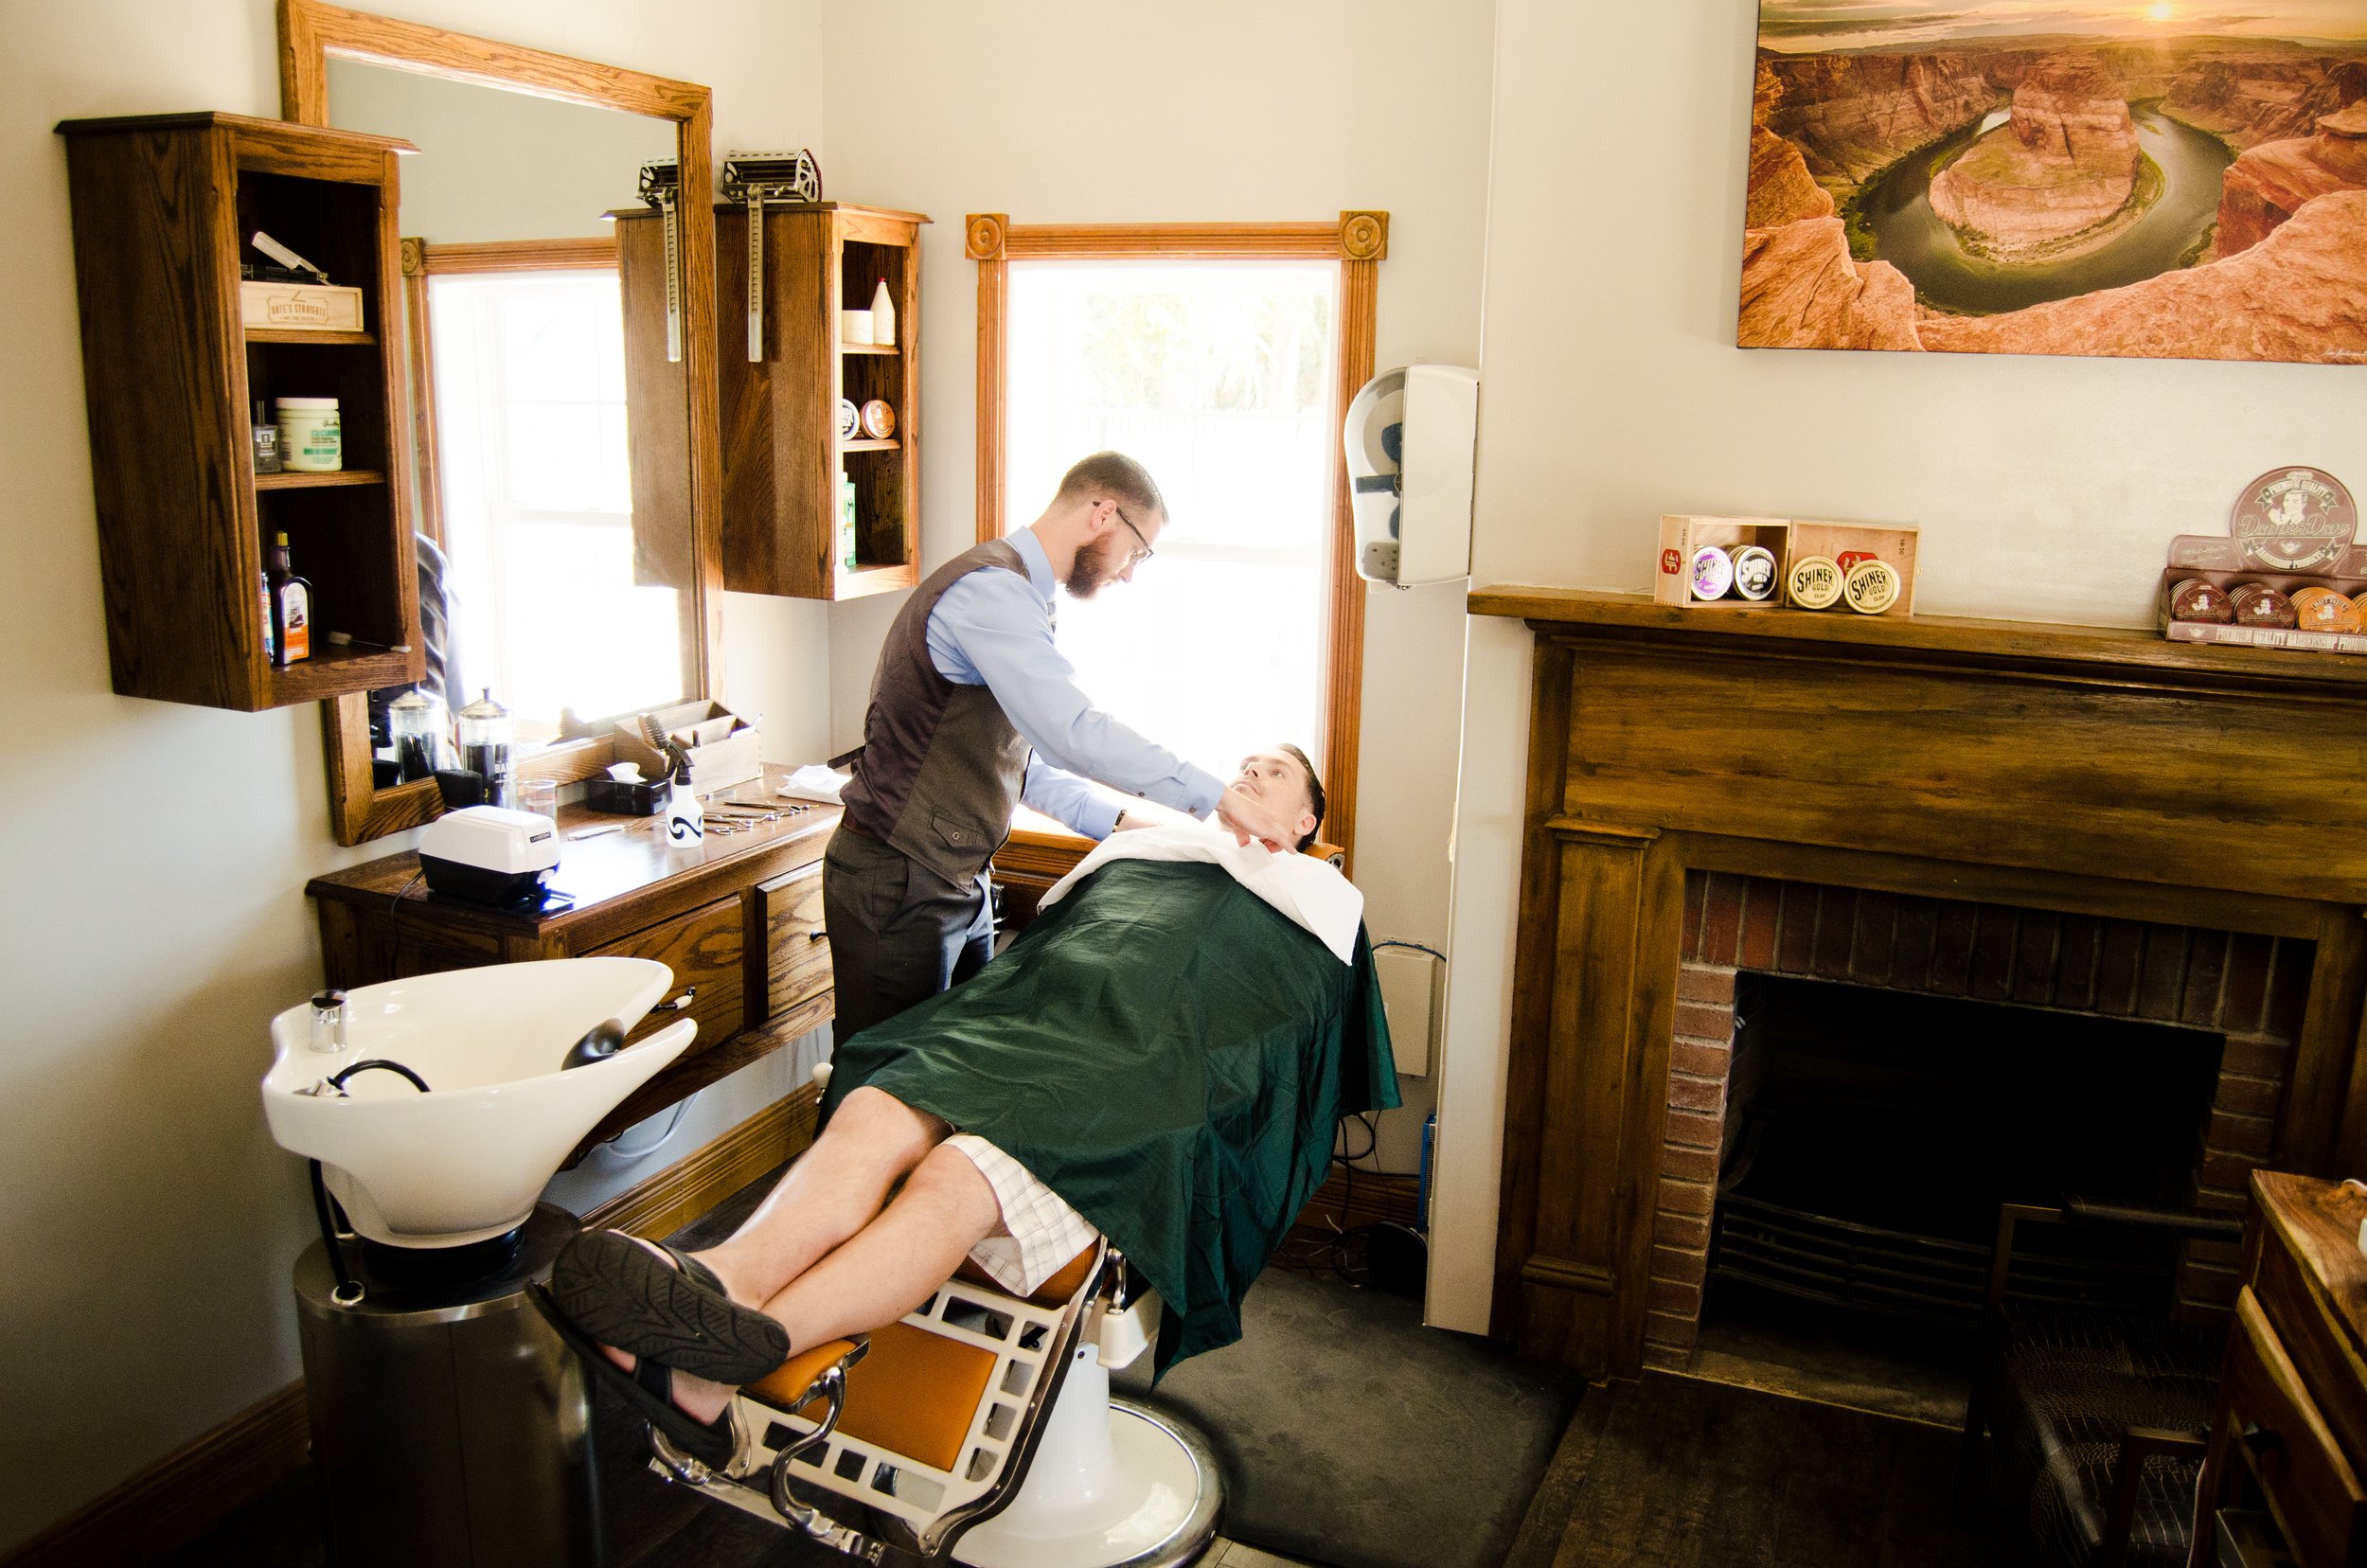 Barbers of Green Gate: Rediscover the Classic Barber Shop